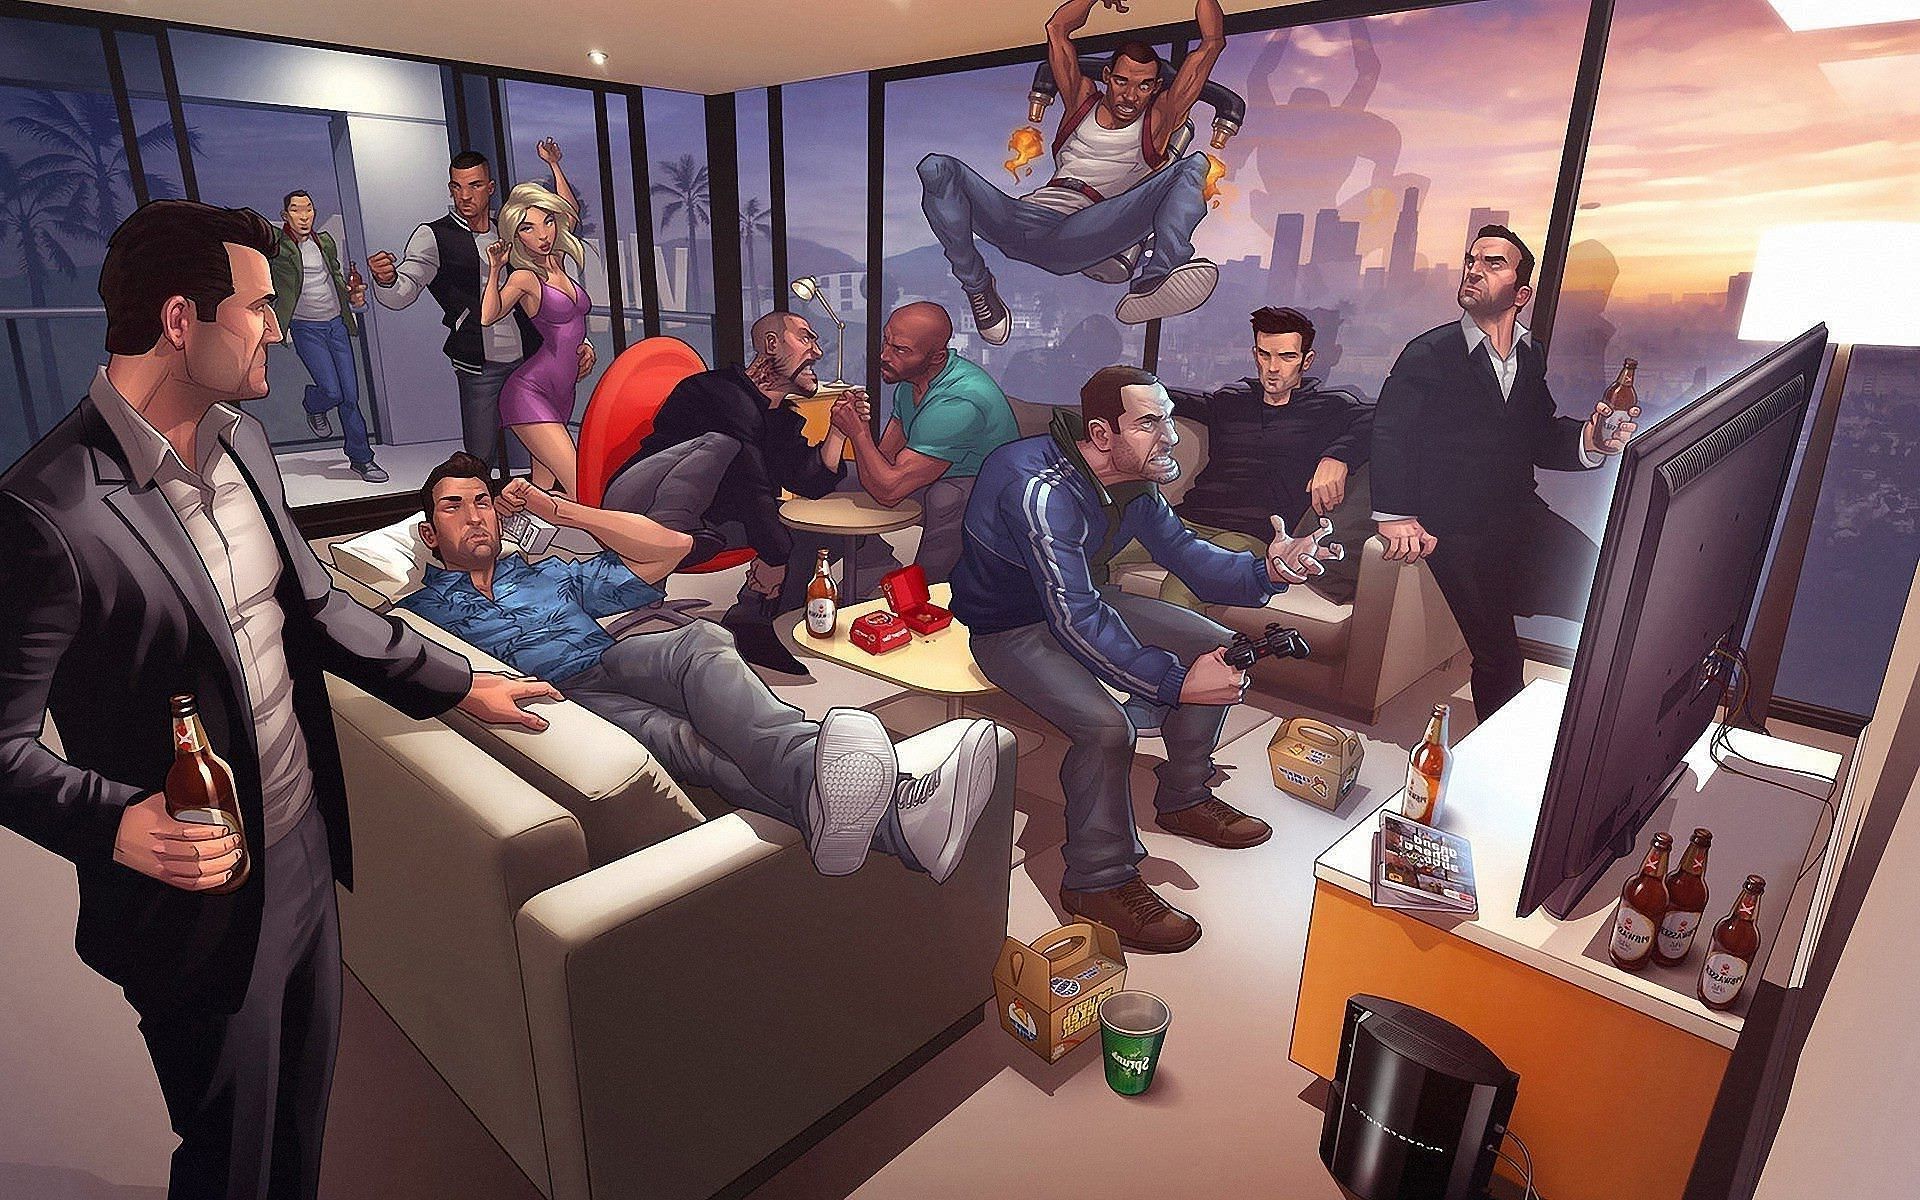 Ranking 7 times GTA games did the unthinkable (Image via wallpapercave.com)